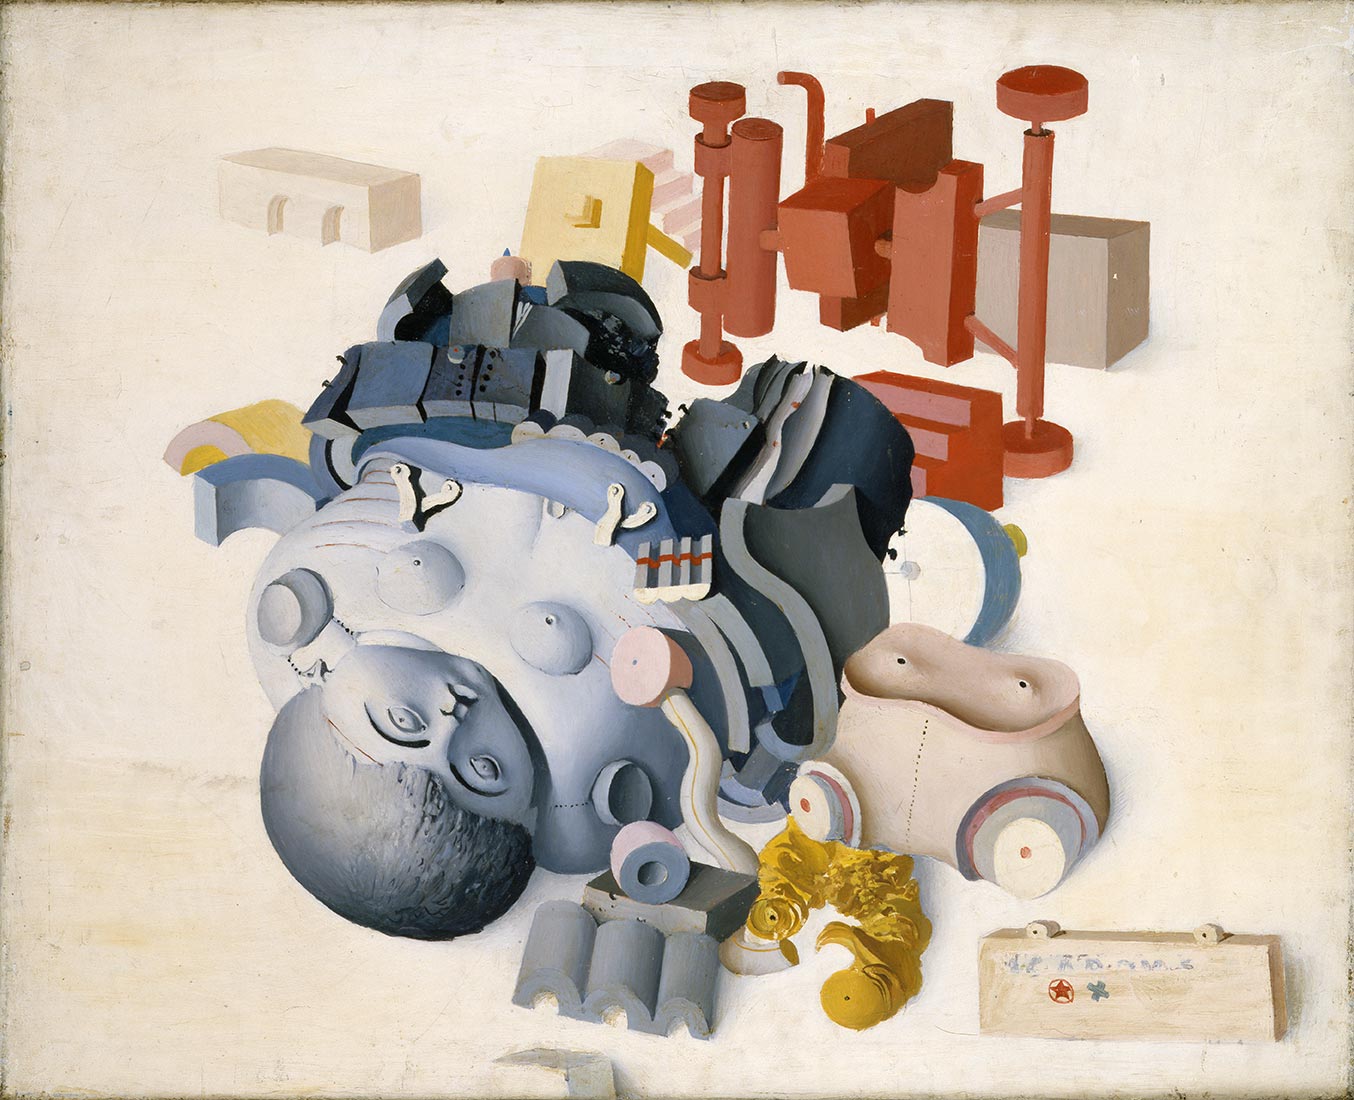 Dado’s painting: Untitled, 1956